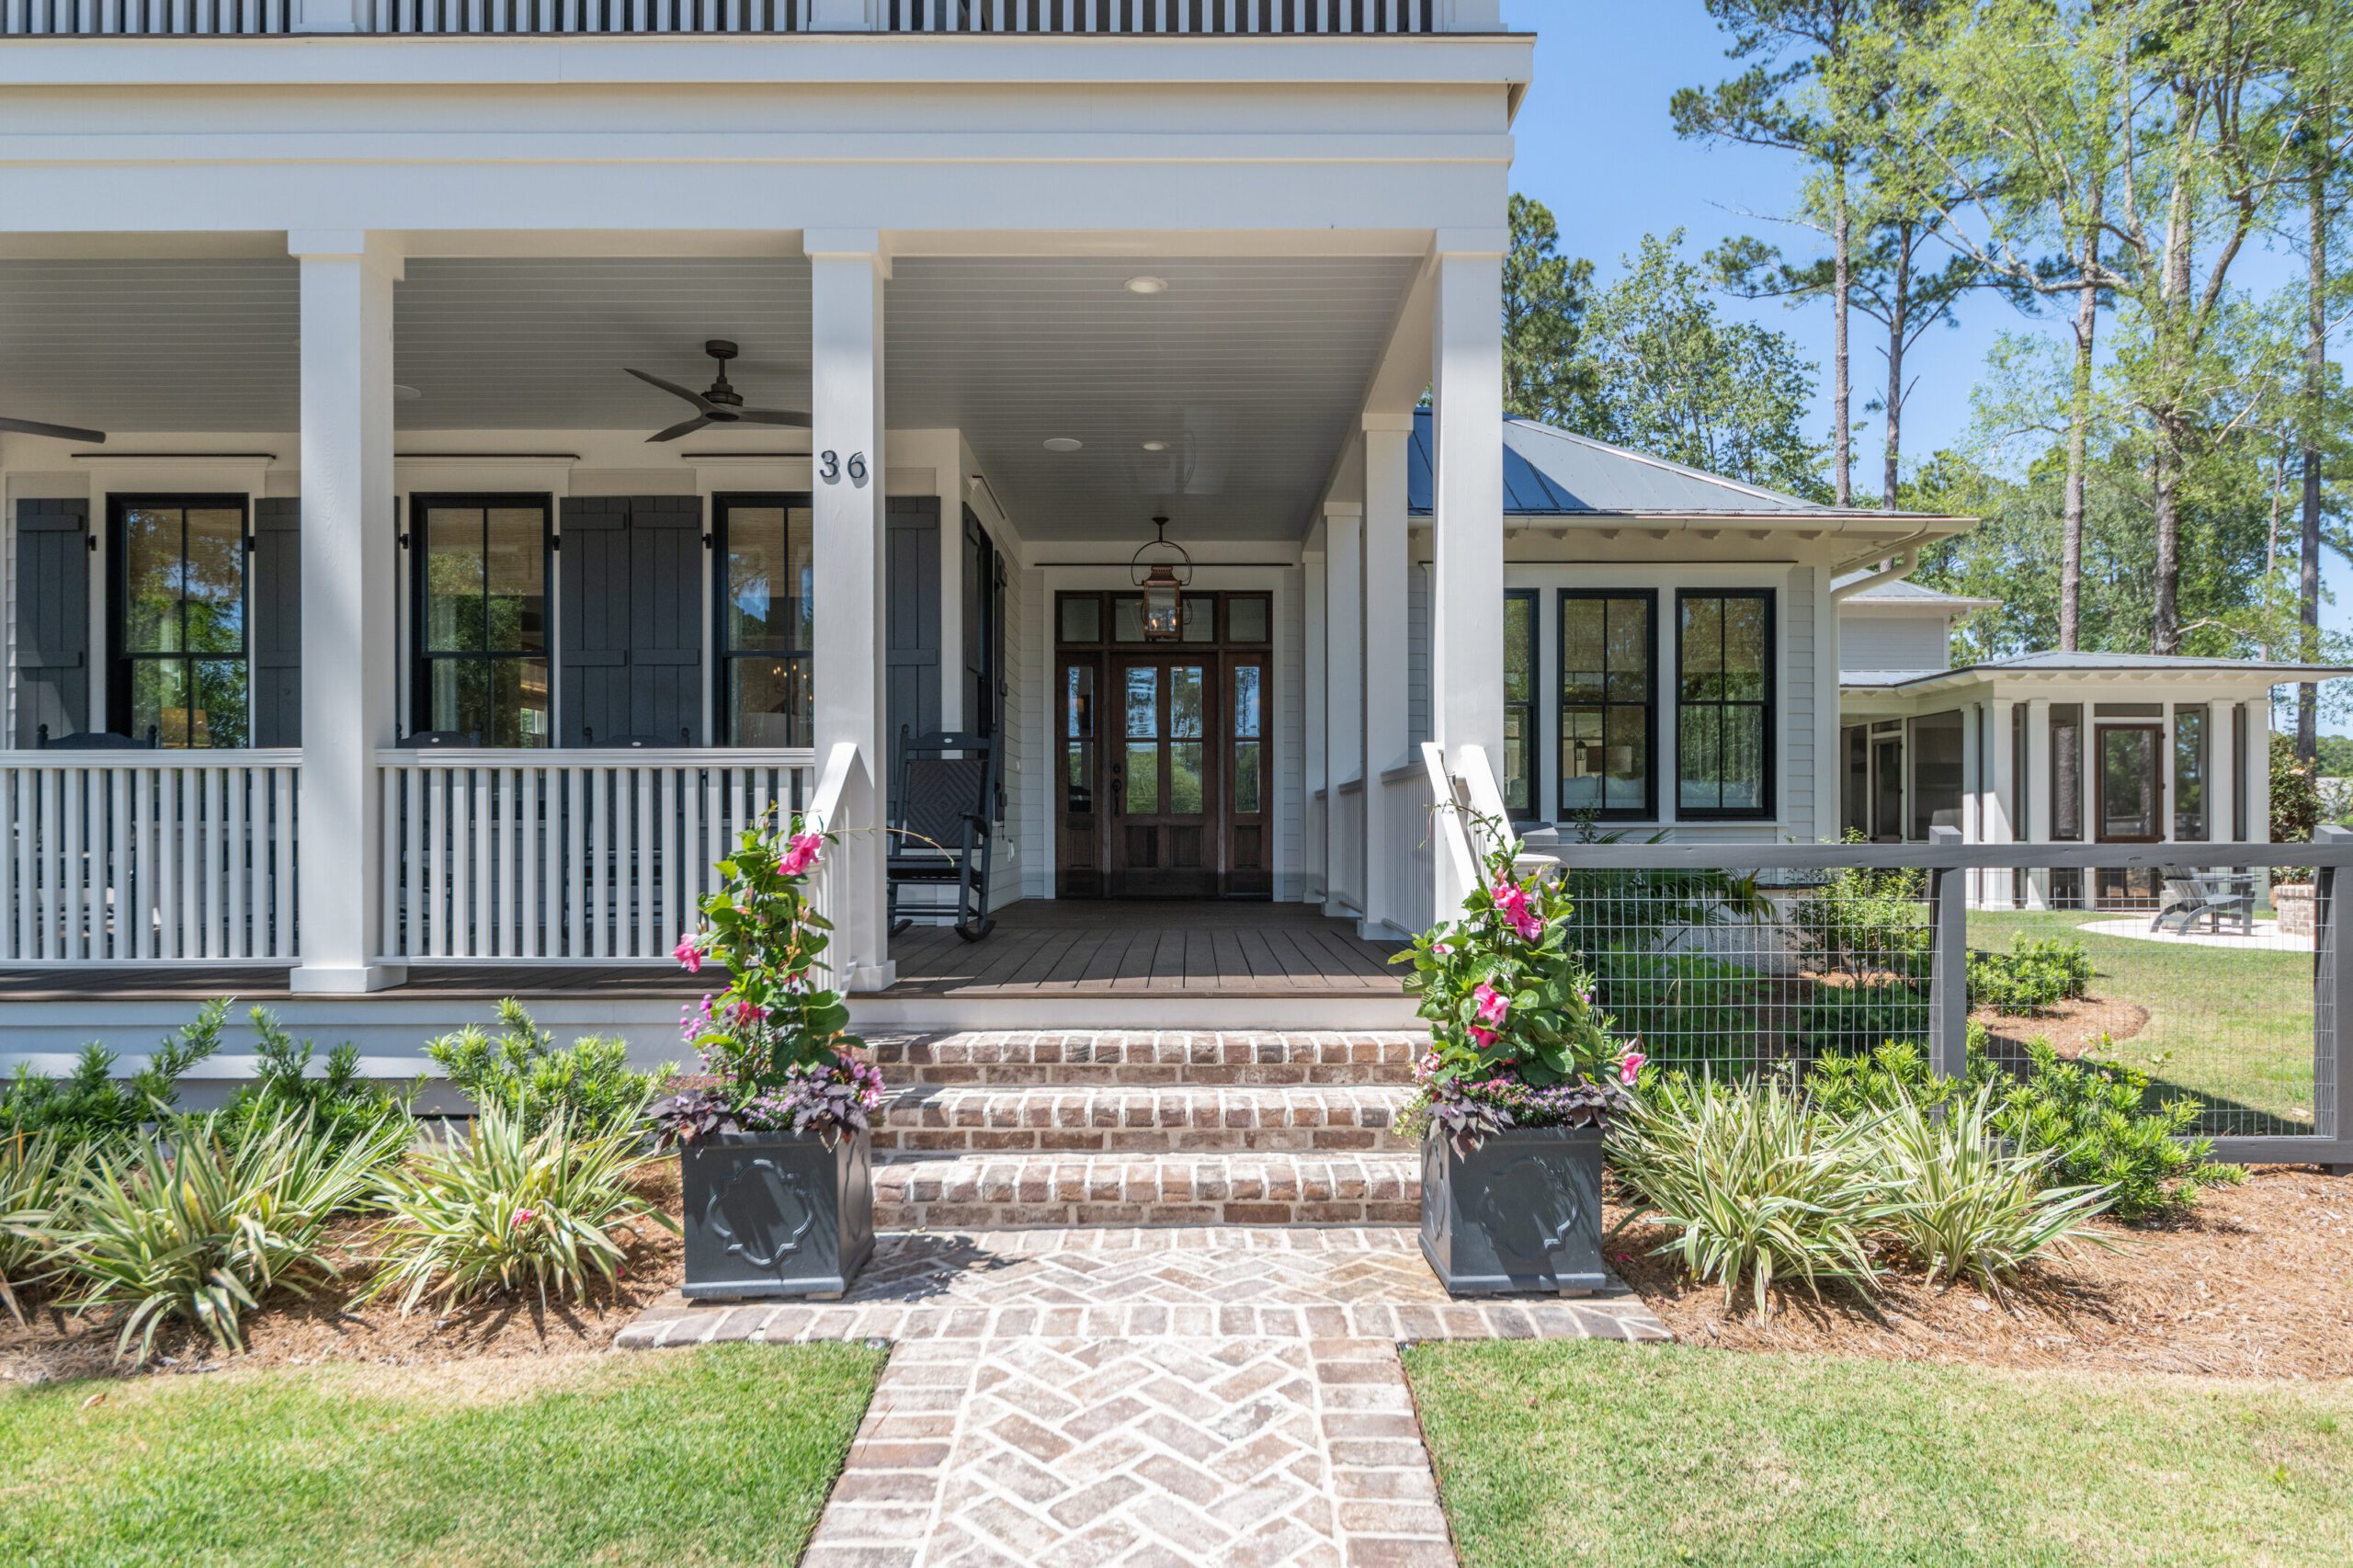 Infusing Classic Southern Charm Into